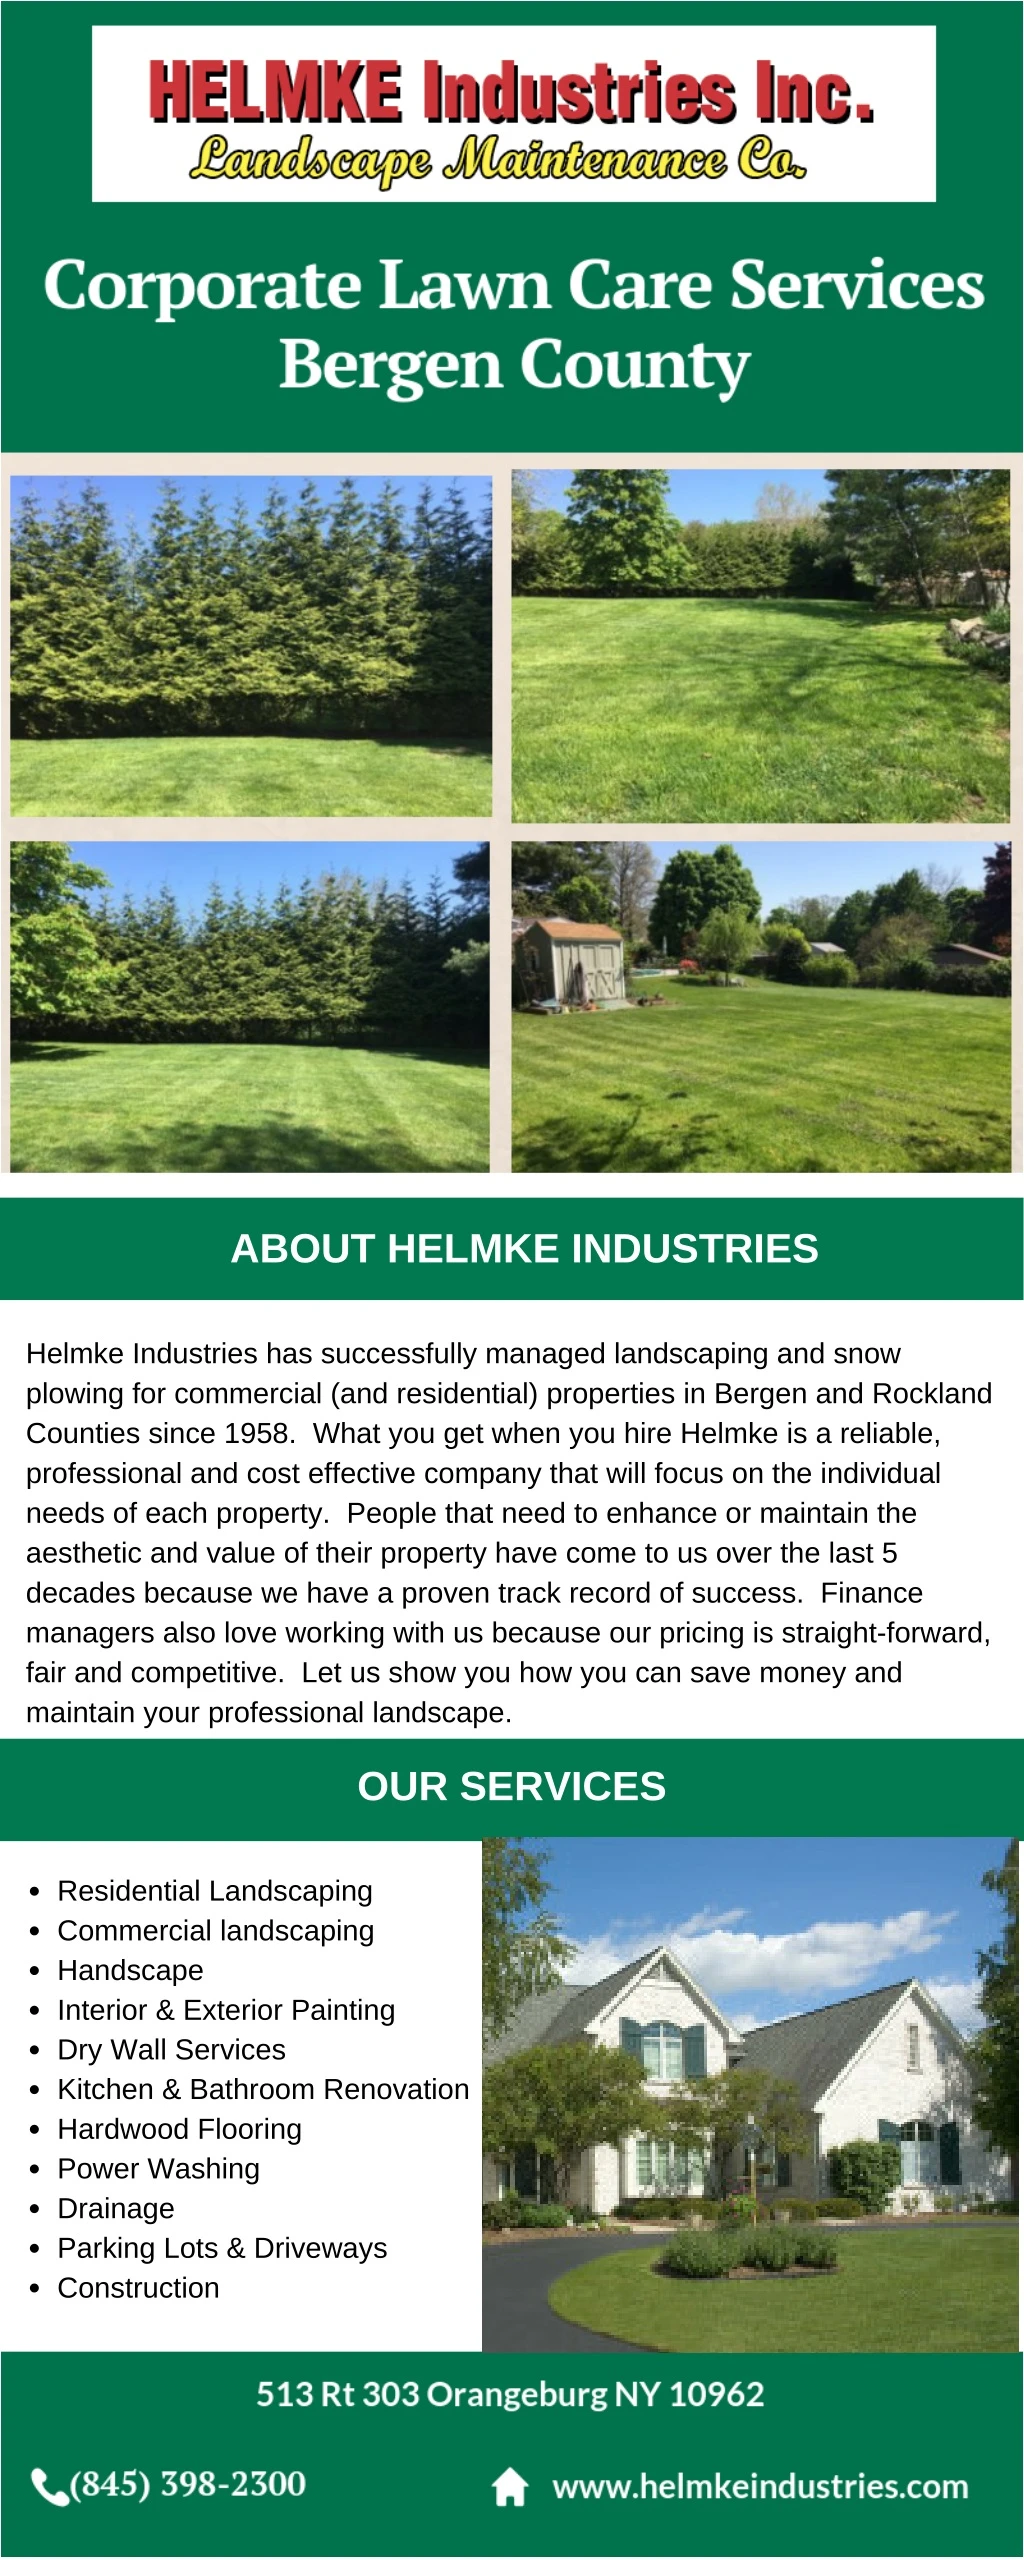 about helmke industries